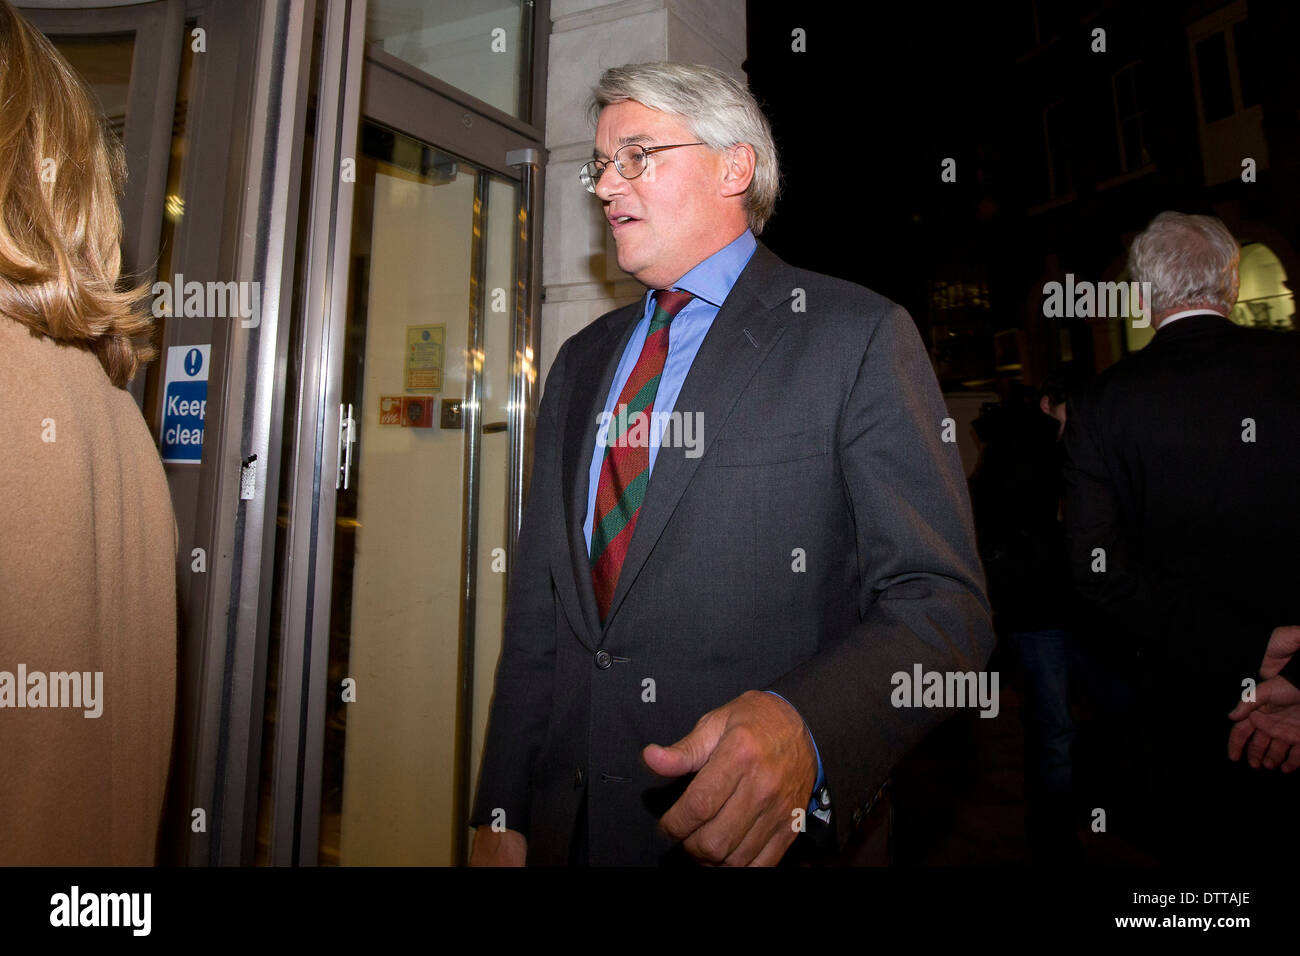 UK, London : Former Conservative Chief Whip Andrew Mitchell MP is pictured in London. Stock Photo